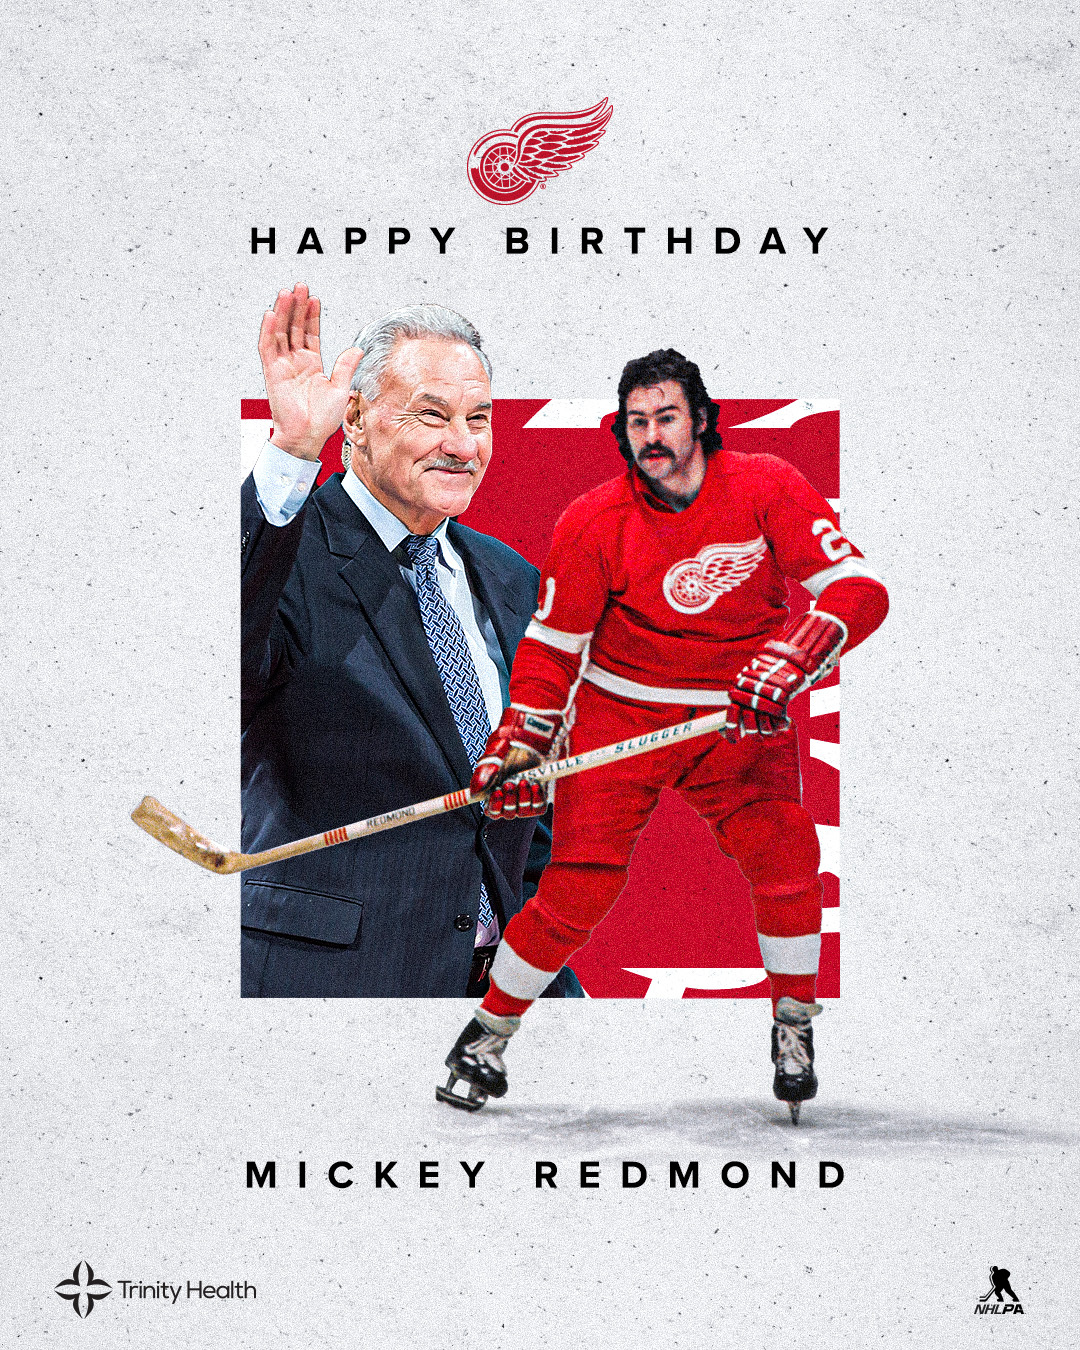 Detroit Red Wings on X: Happy Birthday DMac! 👊